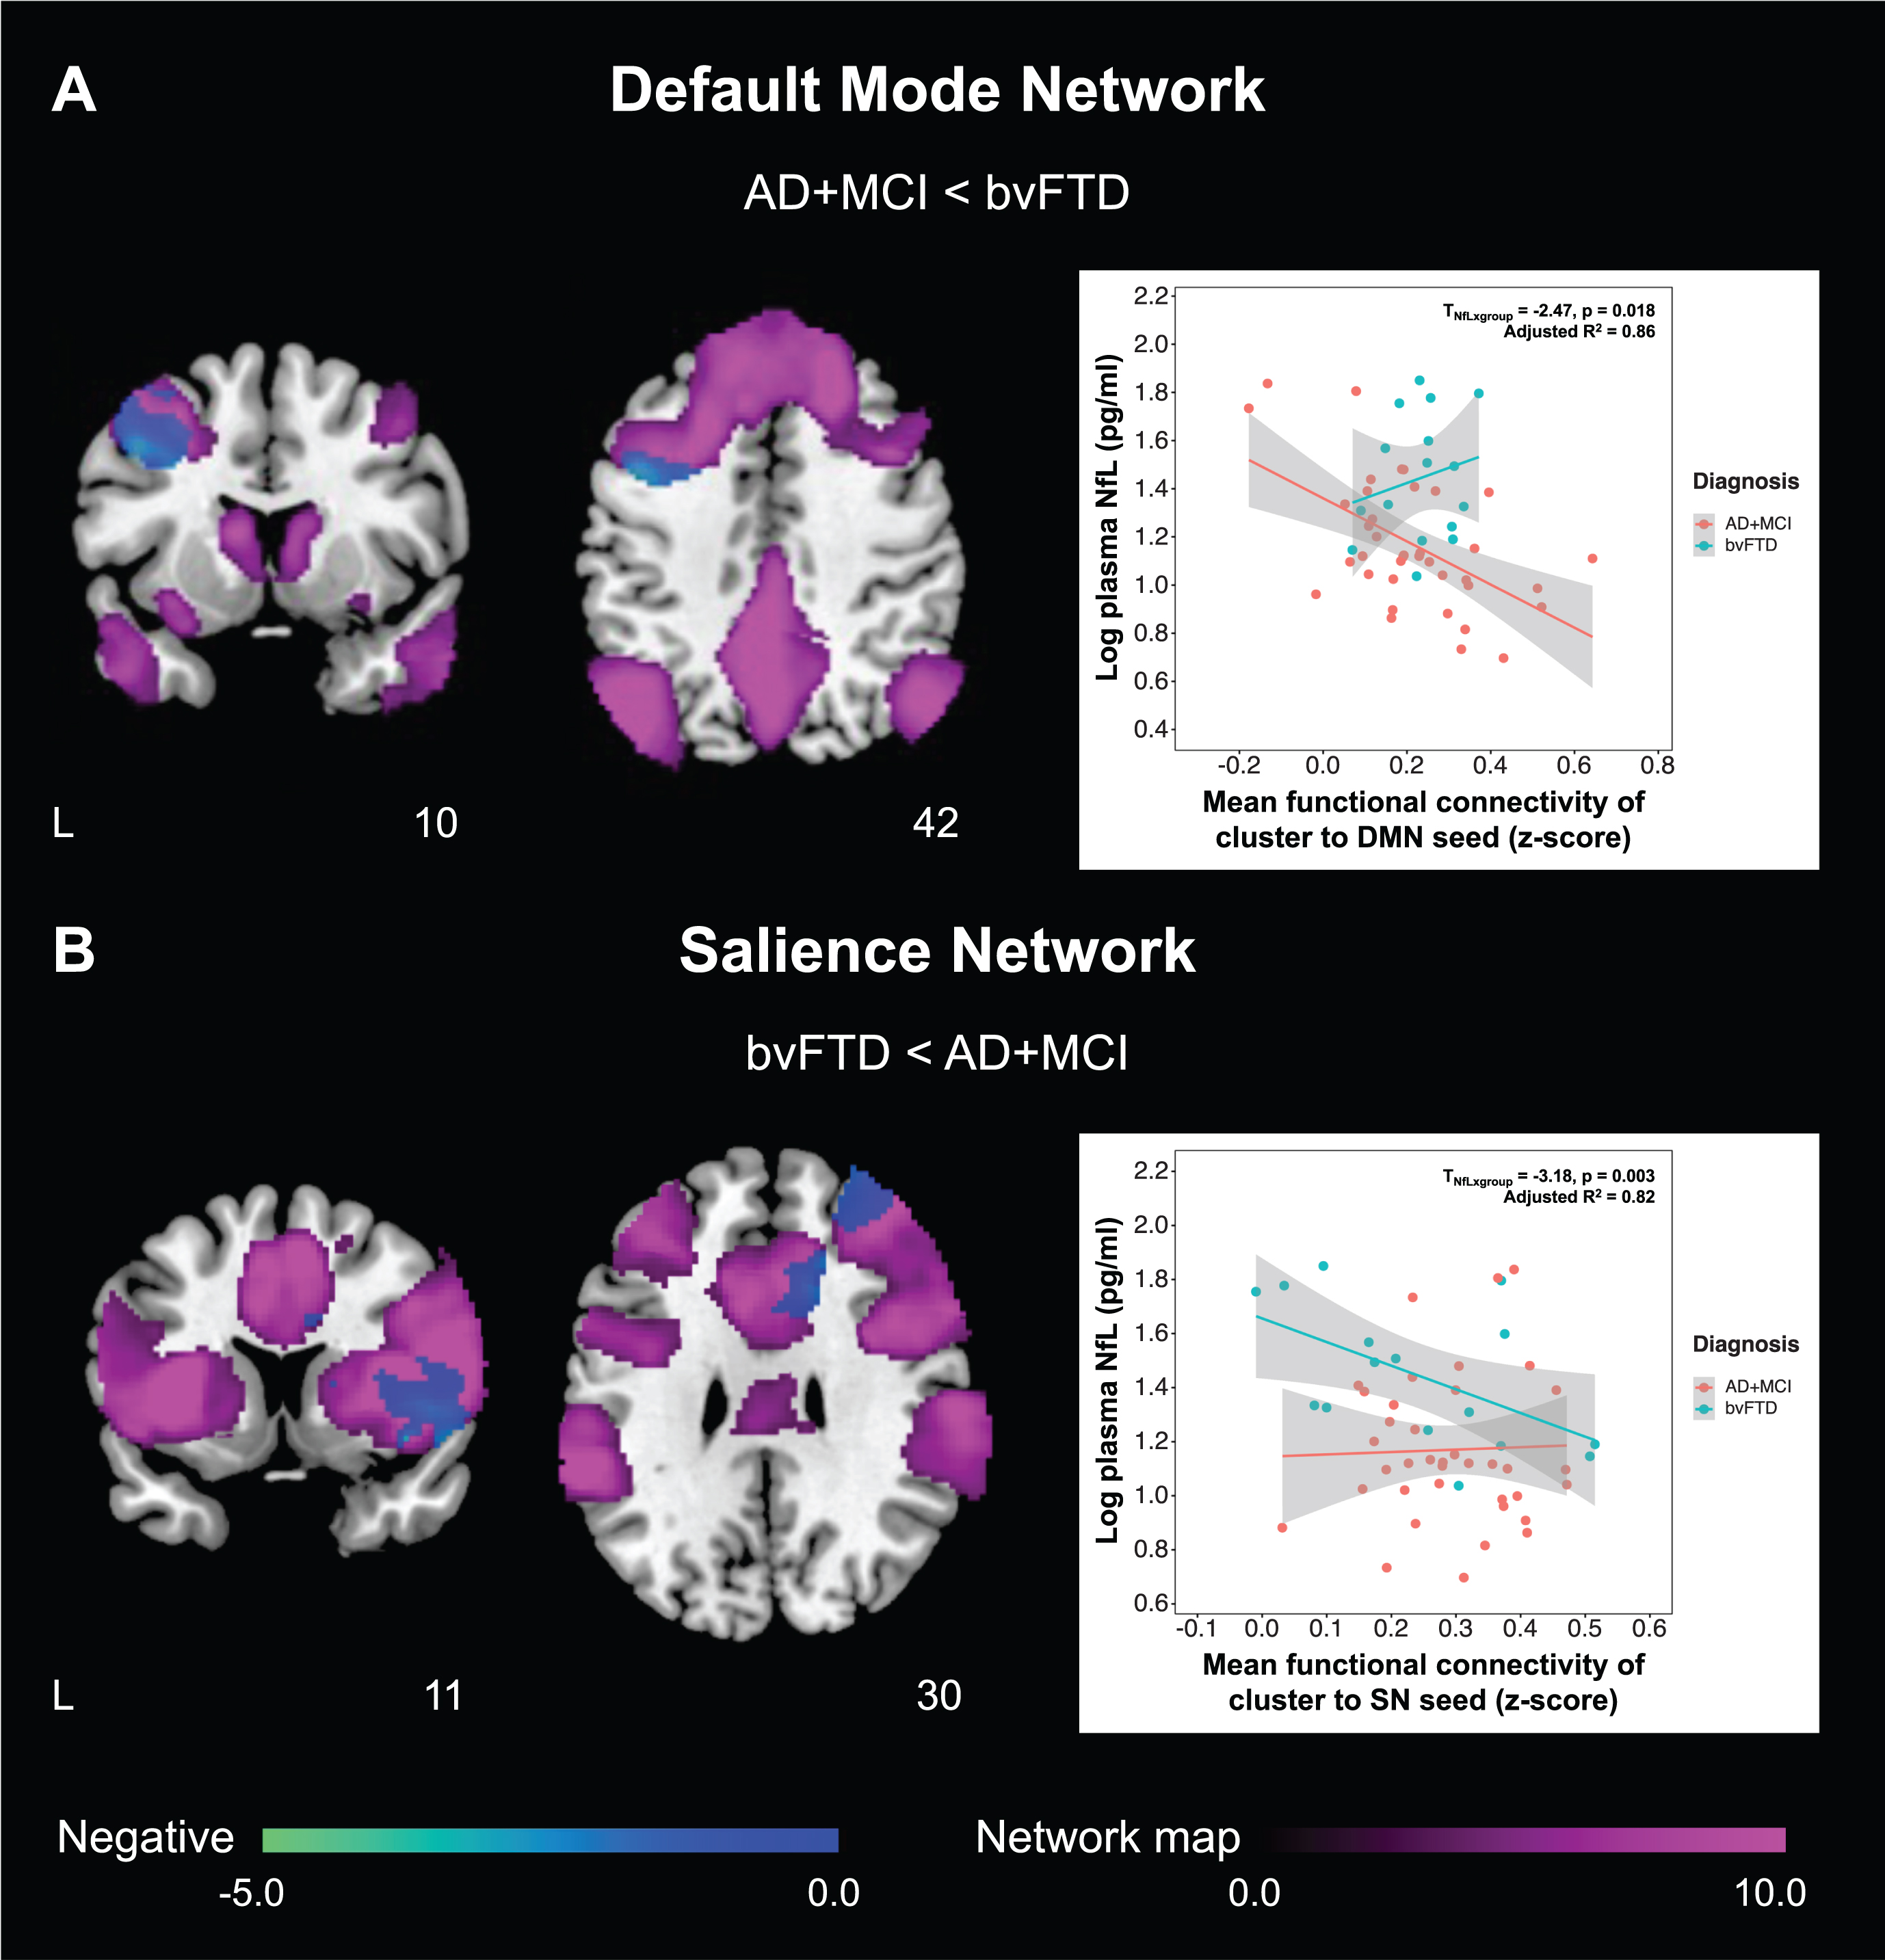 AD + MCI and bvFTD patients show divergent changes in the associations between plasma NfL and fConflictunctional connectivity of default mode and salience networks. Group functional connectivity association maps, depicting brain clusters that show significant negative associations (cool color) between plasma NfL and (A) functional connectivity to the left posterior cingulate cortex (default mode network seed) in AD + MCI patients as well as (B) functional connectivity to the right anterior insula (salience network seed) in bvFTD patients, are overlaid on their respective group network masks generated from cognitively normal controls (purple color). Both maps are displayed on the Montreal Neurological Institute template brain. Scatterplots on the right depict the relationship between plasma NfL and mean functional connectivity of these clusters to the (A) default mode and (B) salience network seeds respectively for both groups. (A) Higher plasma NfL was associated with lower default mode network functional connectivity of the left posterior cingulate cortex to the left dorsolateral prefrontal cortex in AD + MCI patients. The association between plasma NfL and mean functional connectivity of this cluster to the left posterior cingulate cortex was significantly higher in AD + MCI compared to bvFTD patients. By comparison, (B) higher plasma NfL was associated with lower salience network functional connectivity of the right anterior insula to a cluster comprising the right frontal gyrus, insula, putamen, middle and anterior cingulate cortex in bvFTD patients. The association between plasma NfL and mean functional connectivity of this cluster to the right anterior insula was significantly higher in bvFTD compared to AD + MCI patients. NfL, neurofilament light; AD, Alzheimer’s disease; MCI, mild cognitive impairment; bvFTD, behavioral variant frontotemporal dementia; DMN, default mode network; SN, salience network.